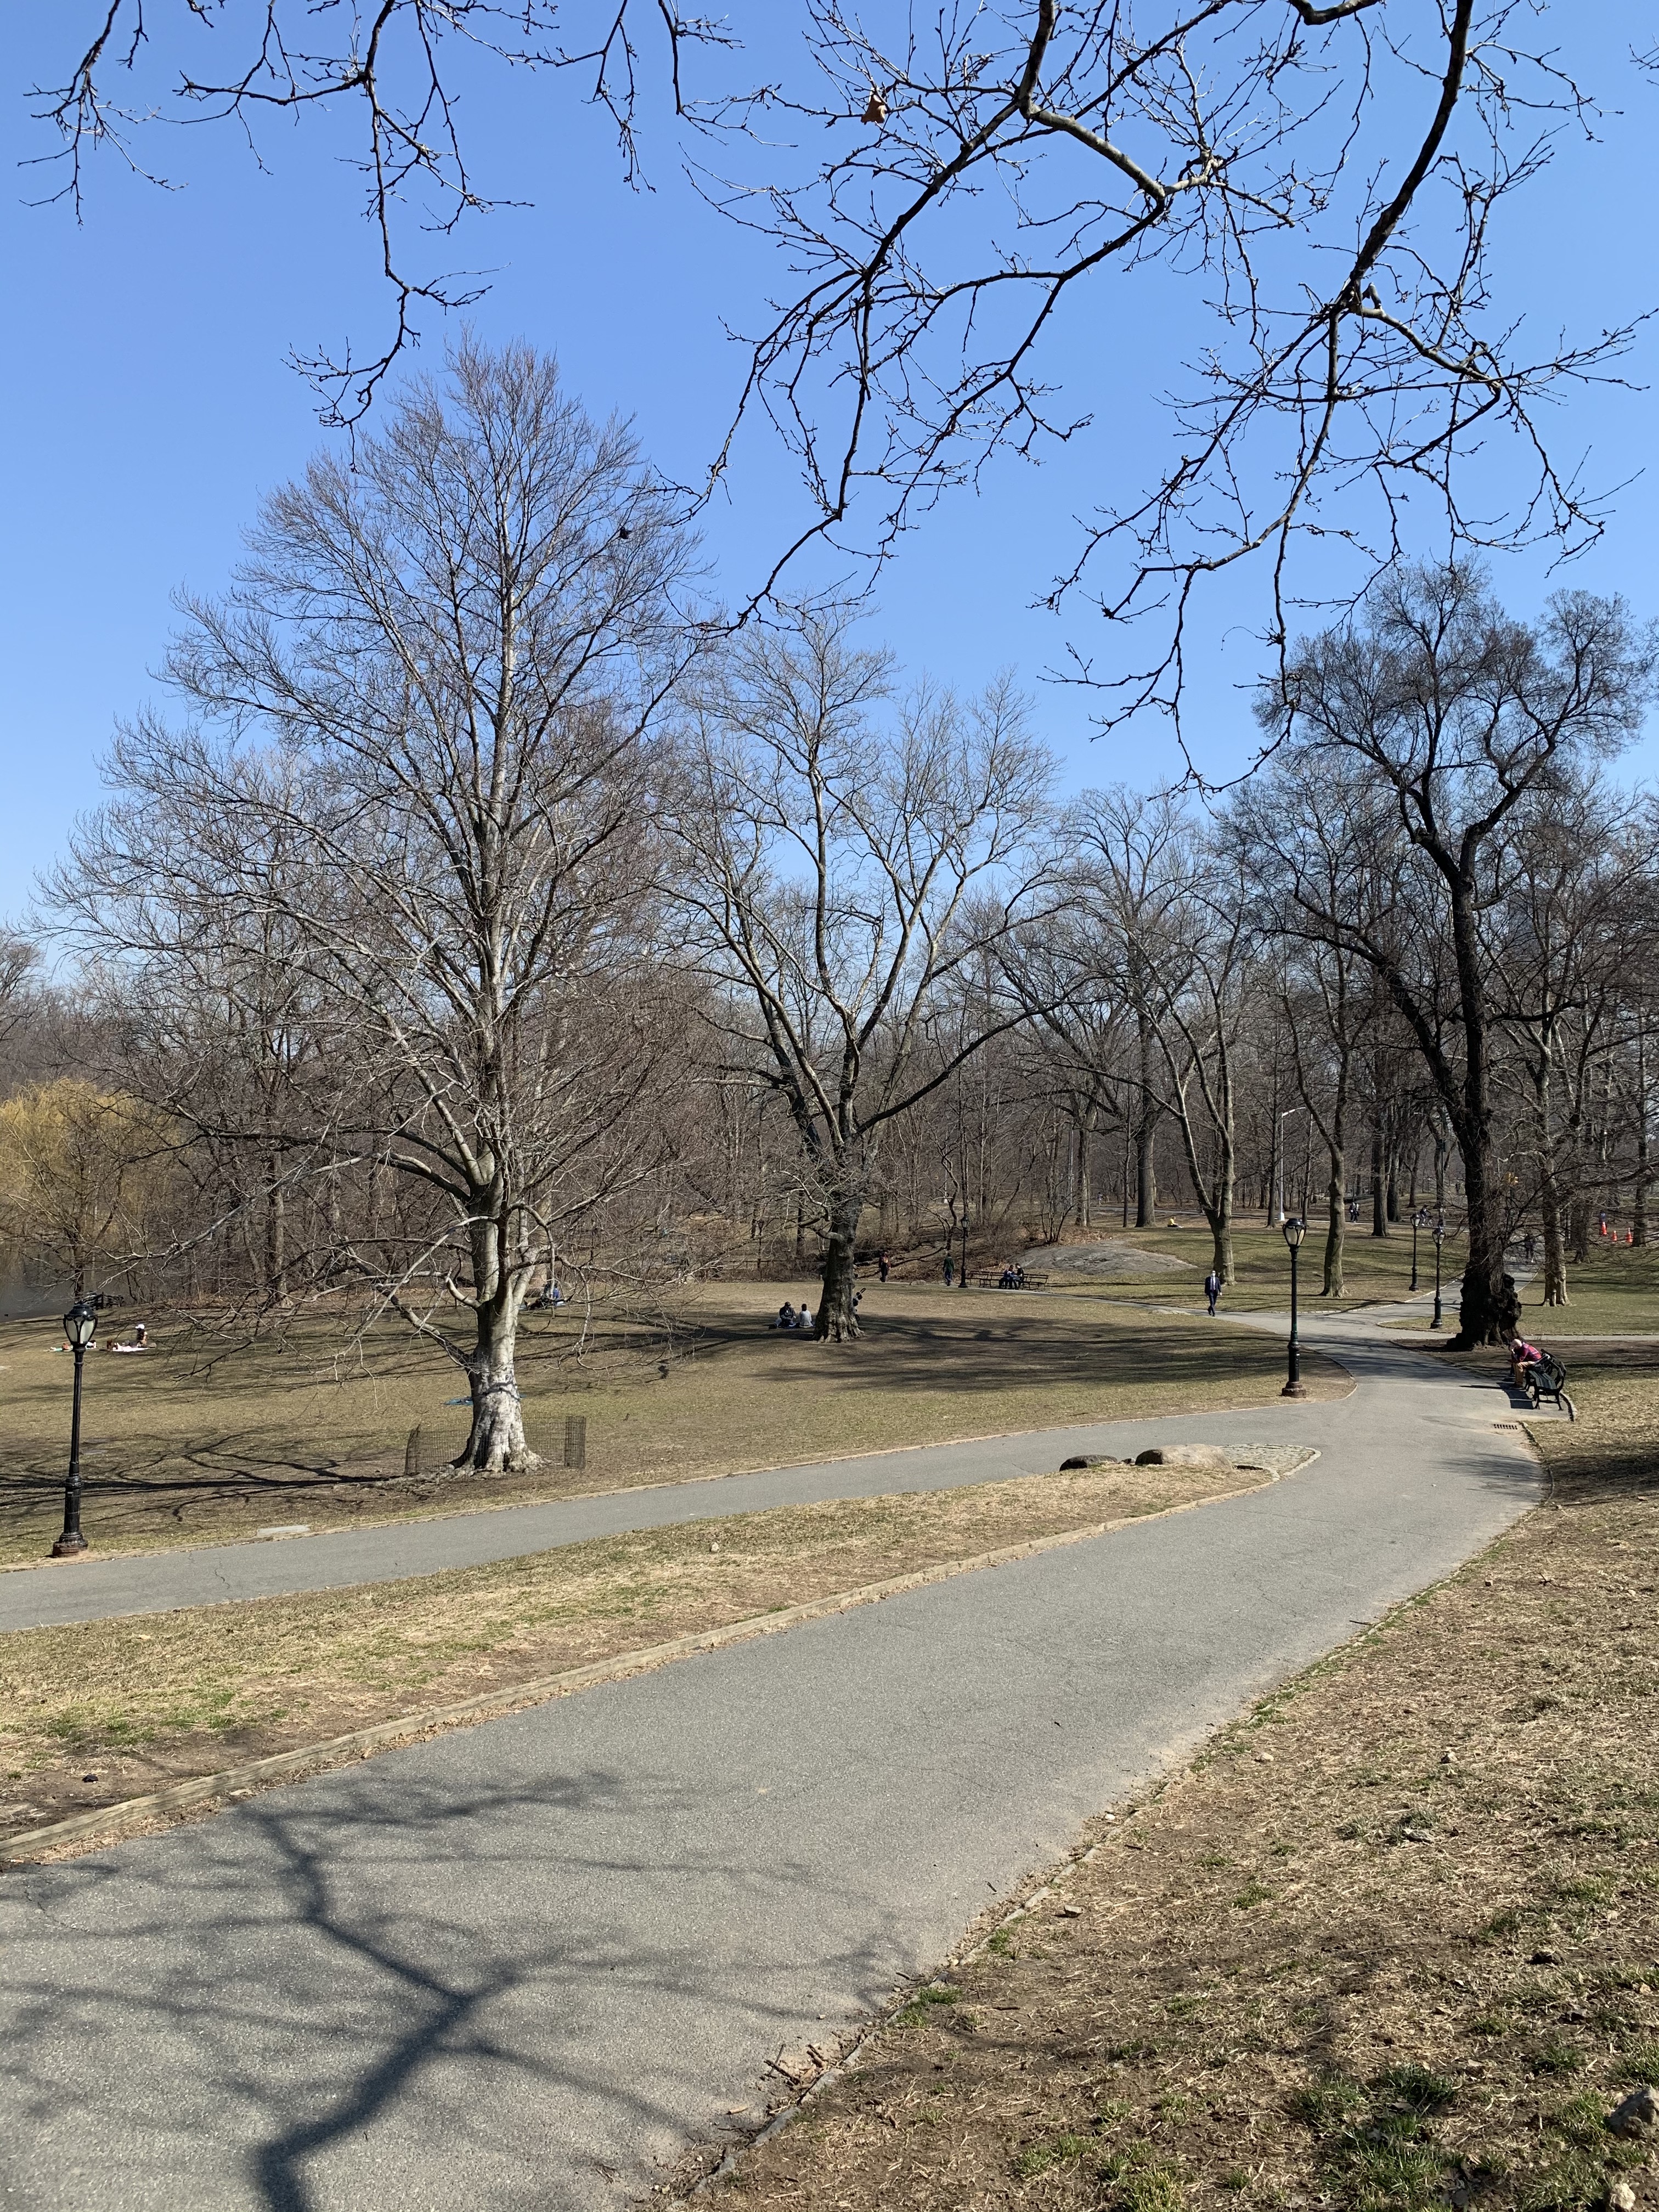 Central Park in NYC view, trees and walking path